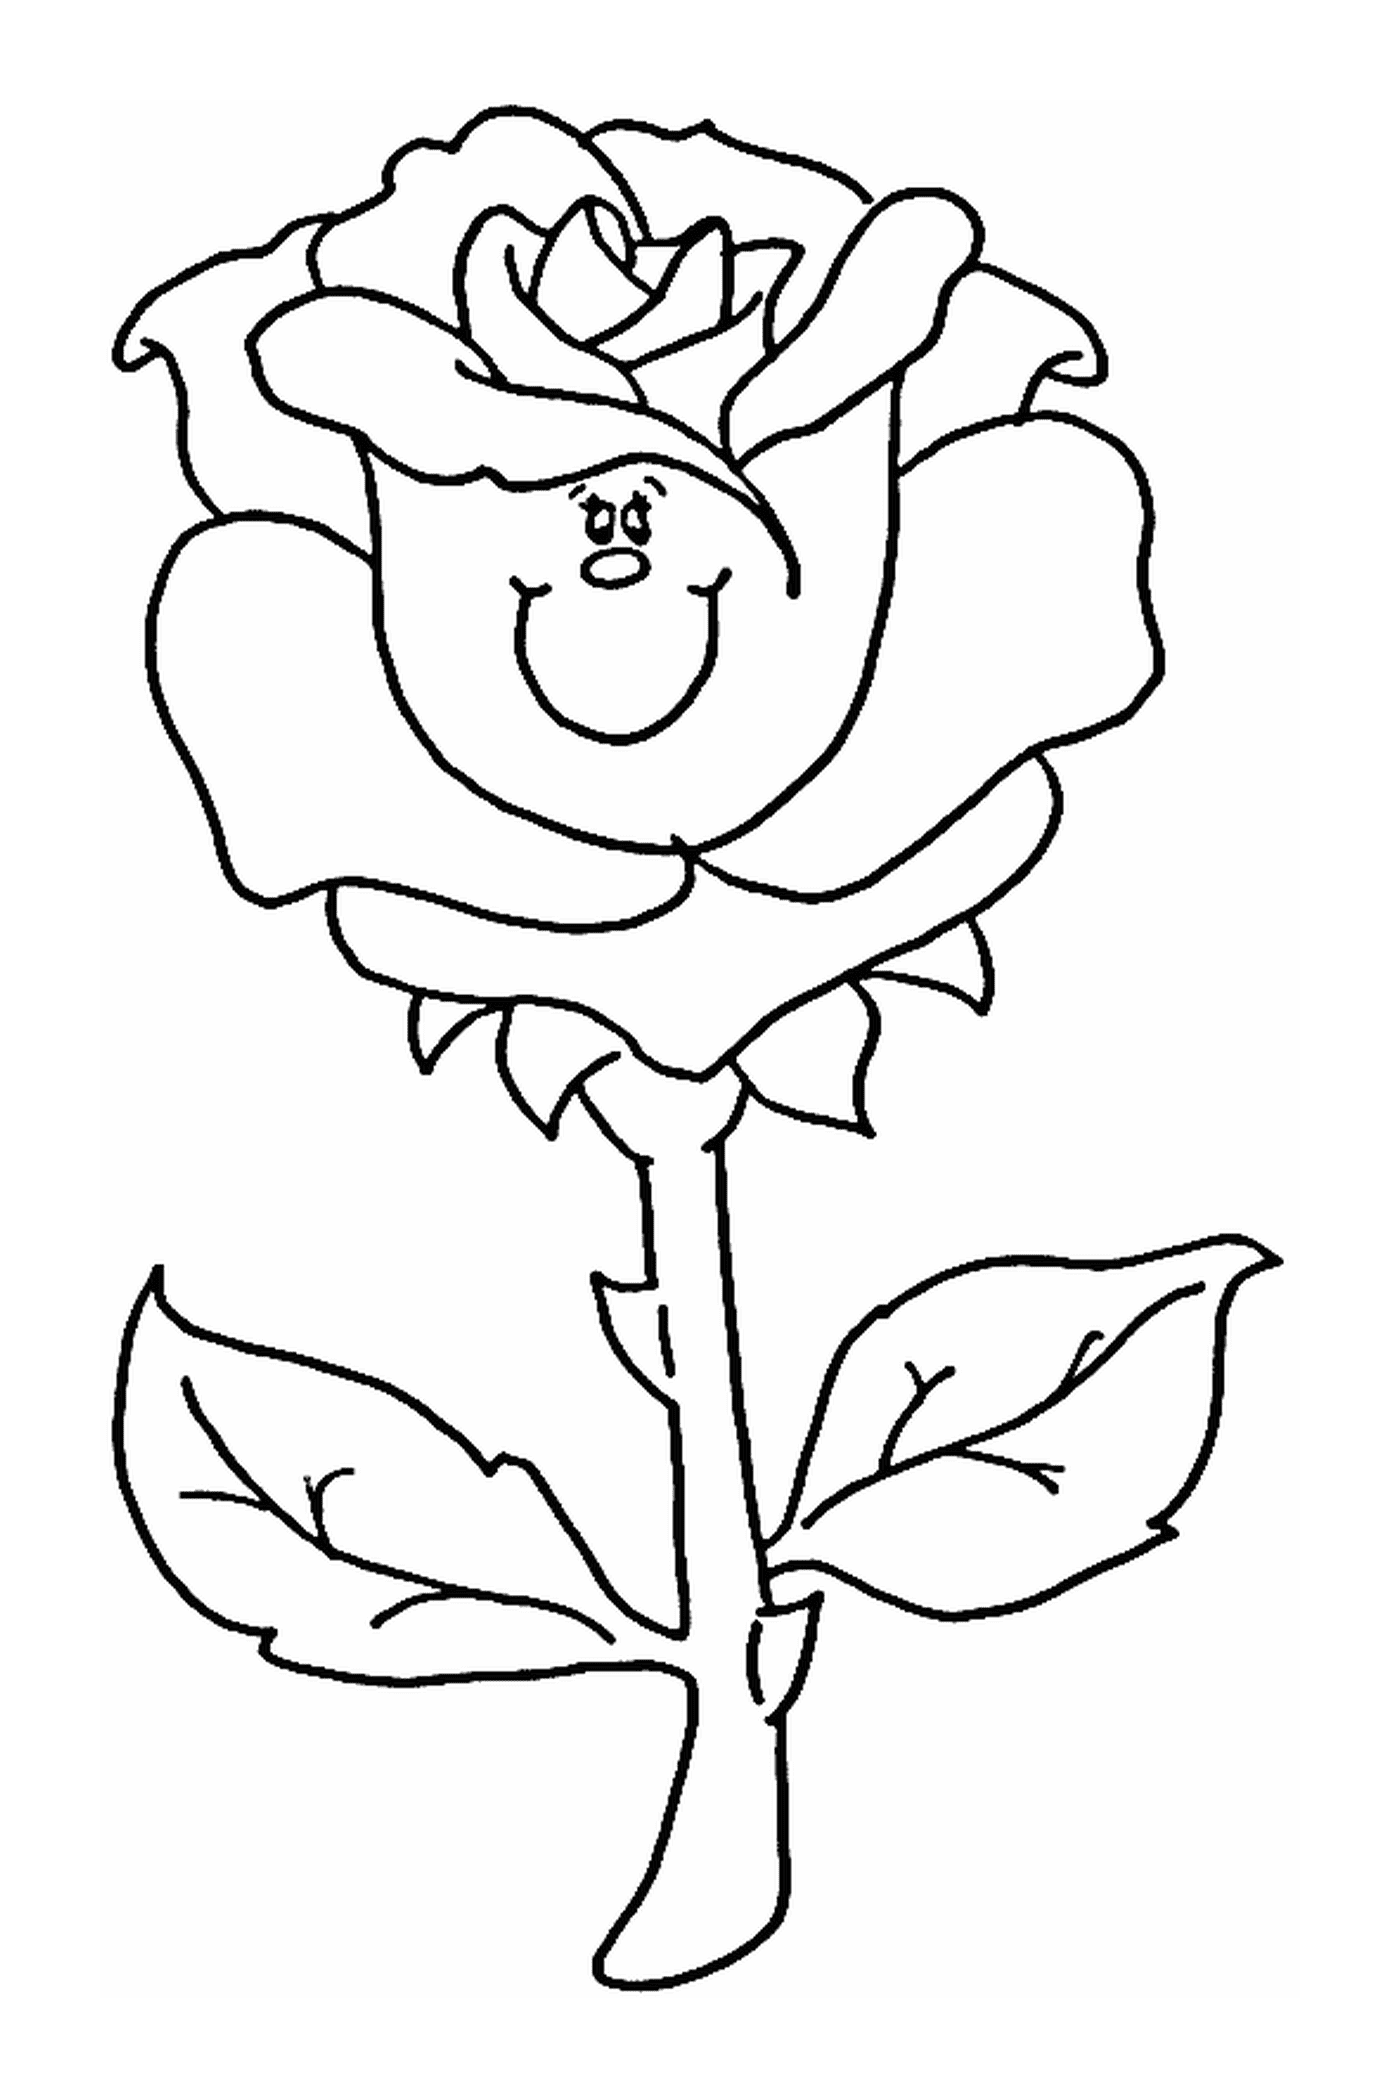  A rose with its stem 